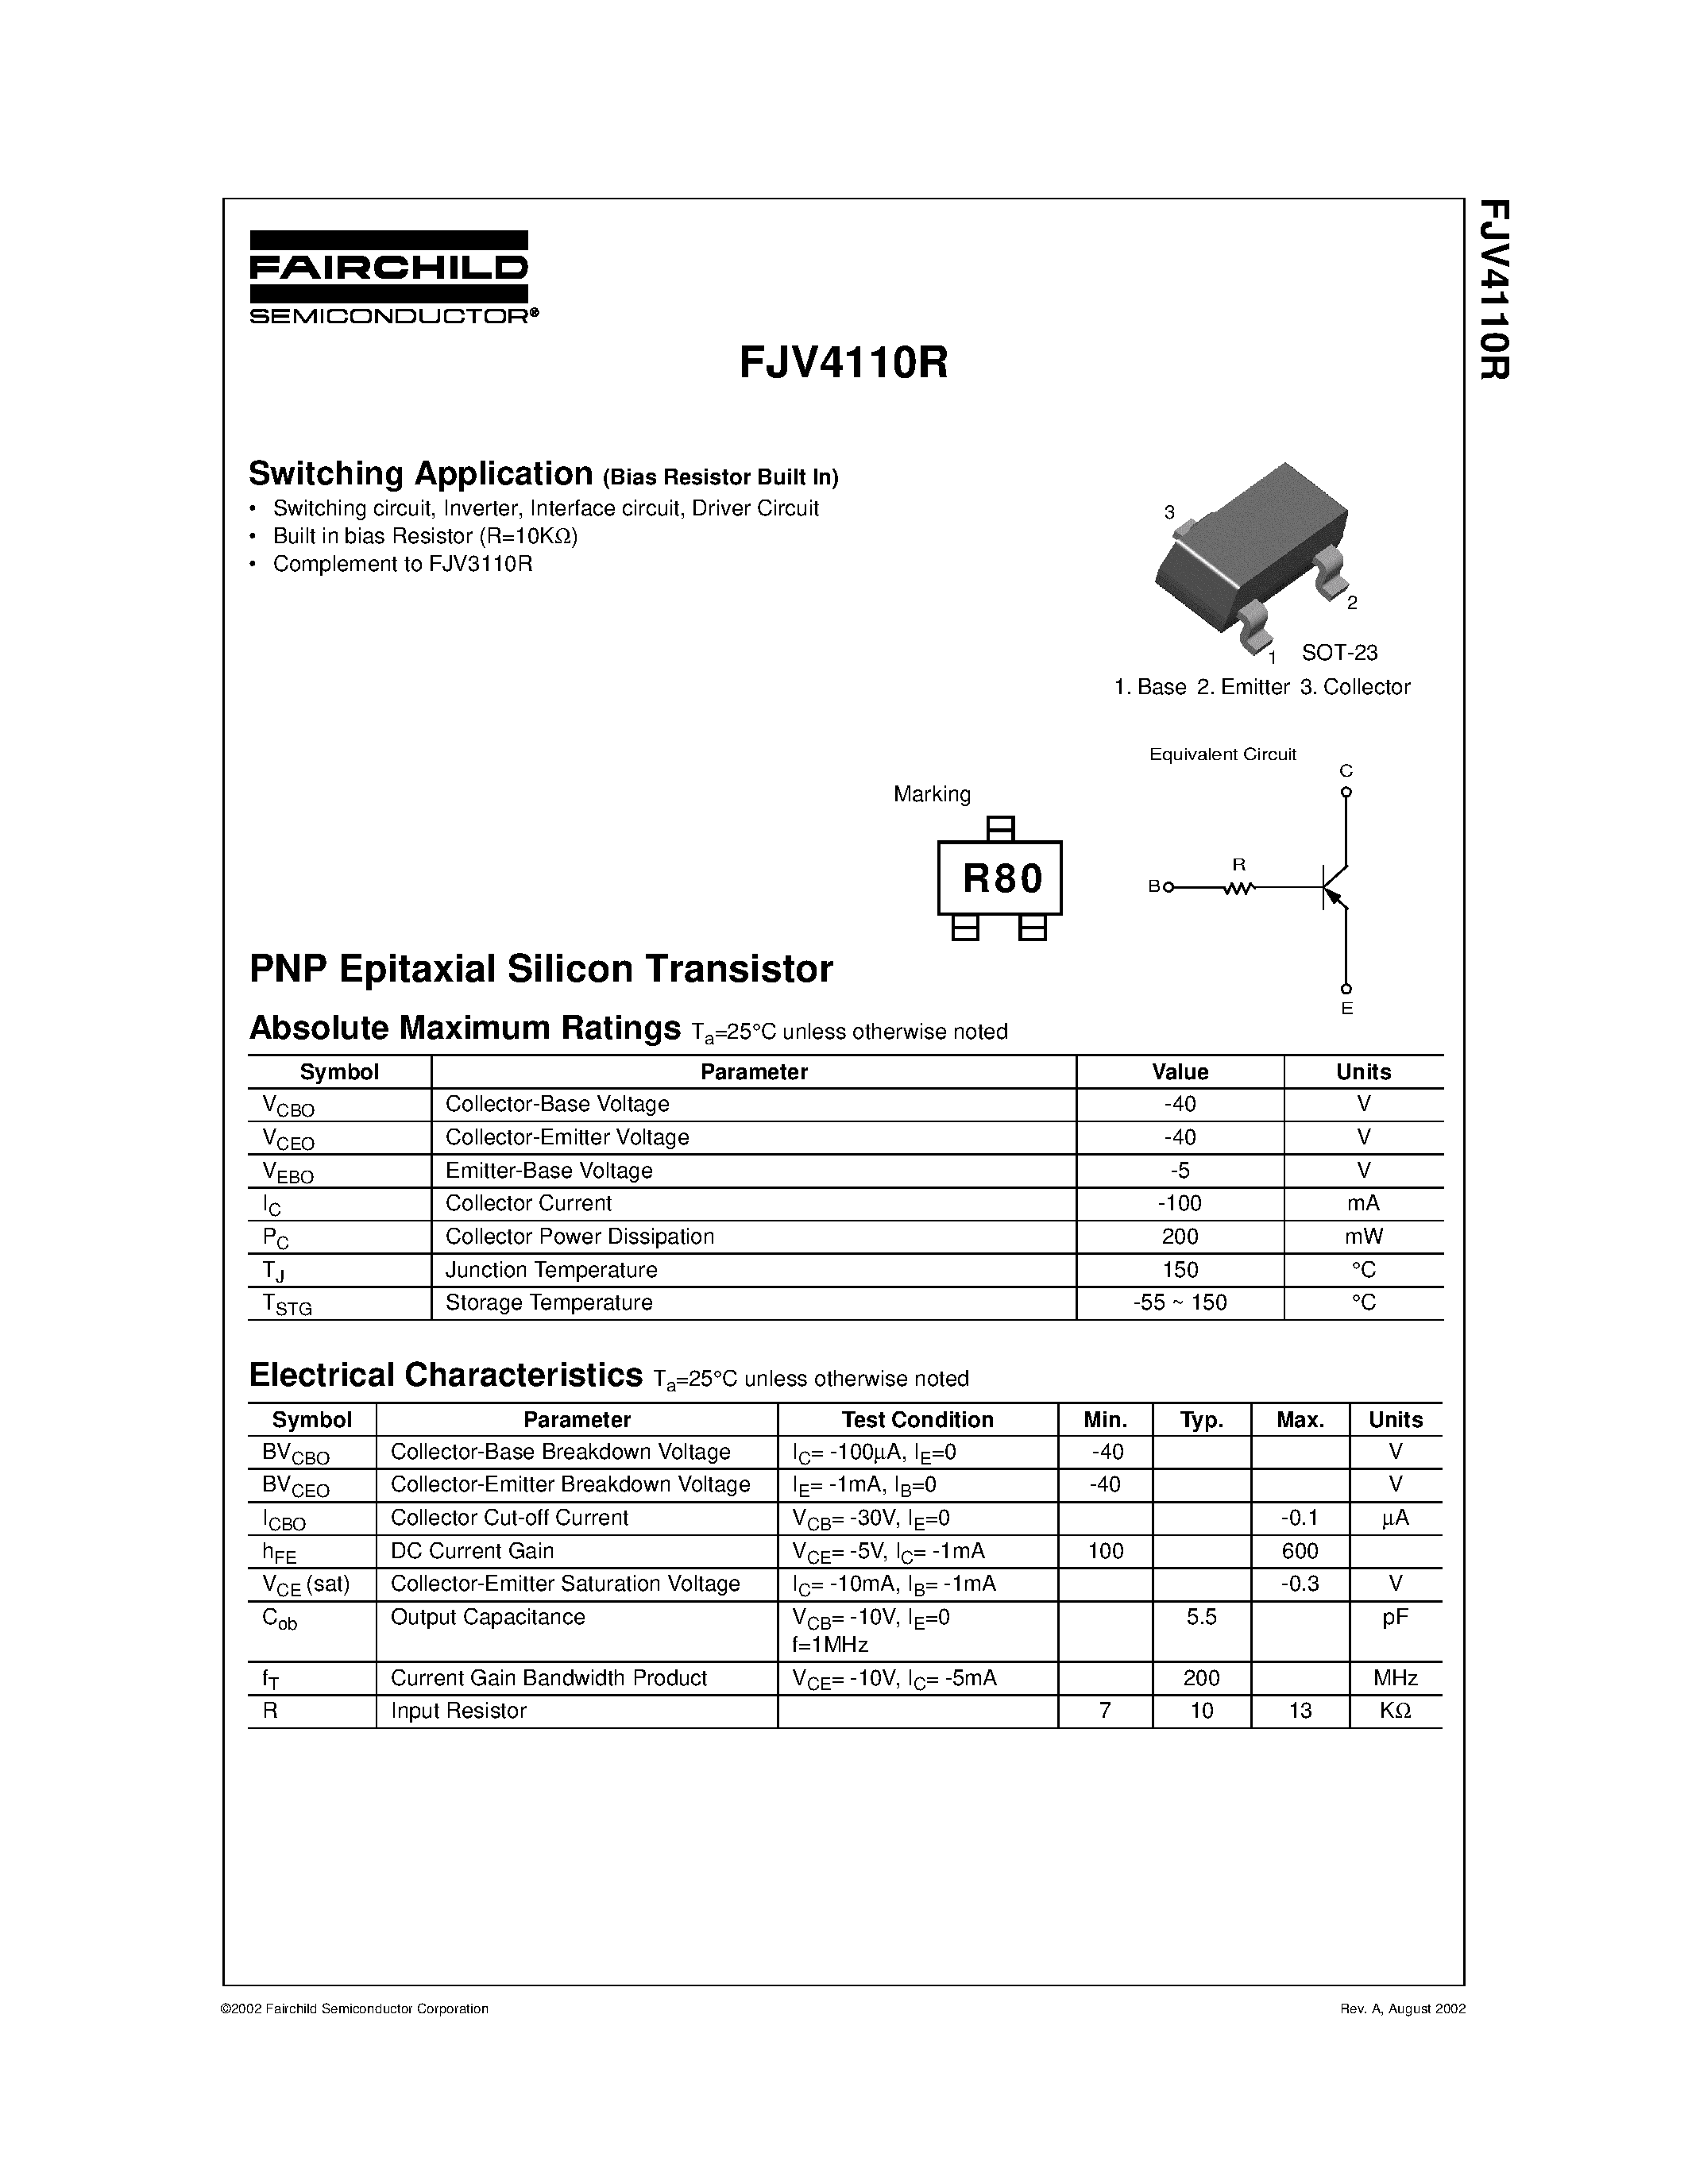 Даташит FJV4110R - PNP Epitaxial Silicon Transistor страница 1